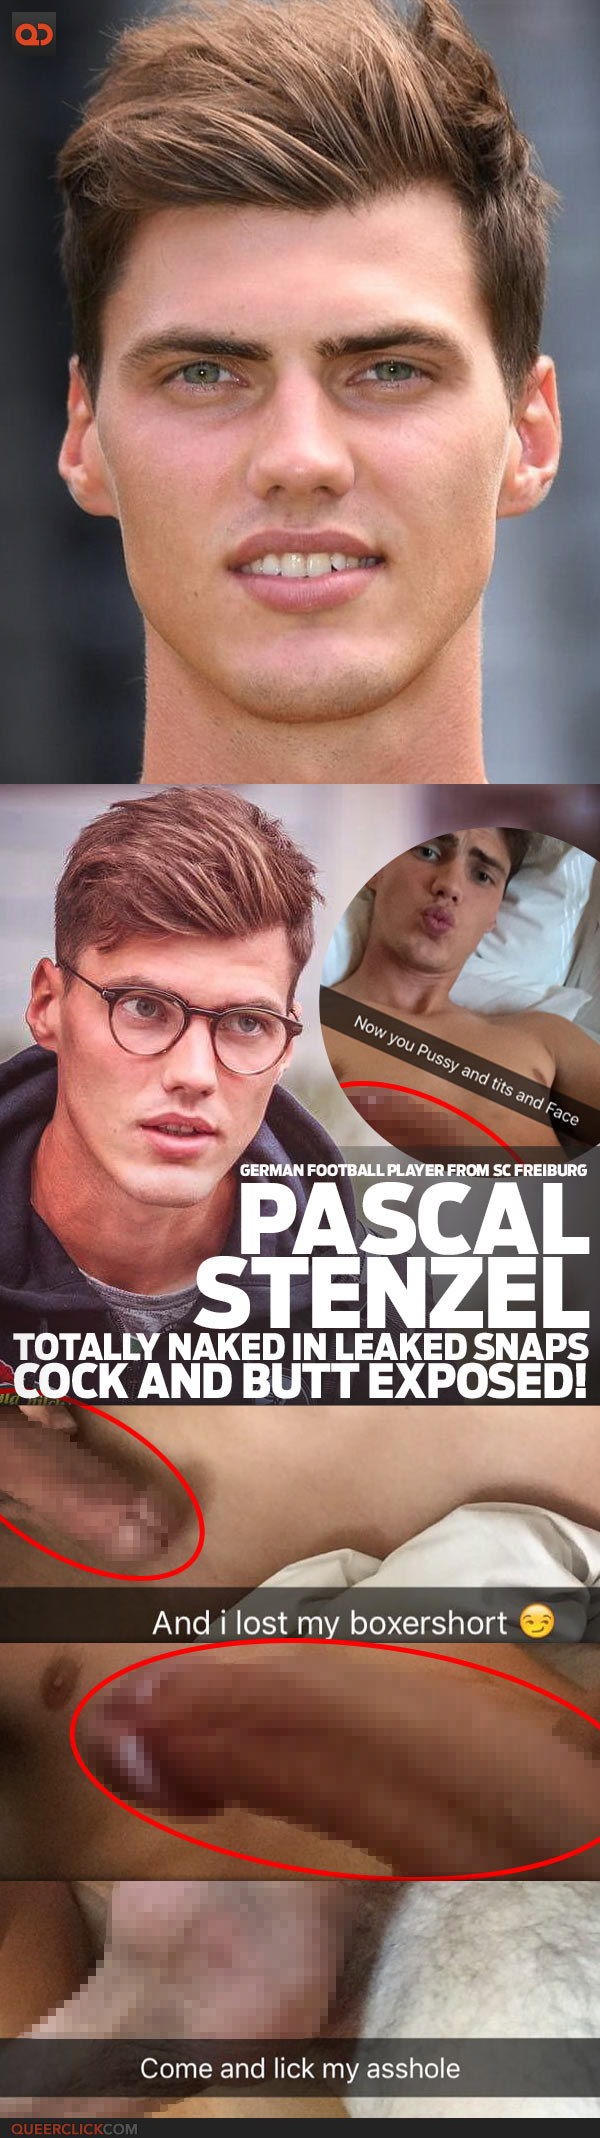 Pascal Stenzel, German Football Player From SC Freiburg, Totally Naked In Leaked Snaps - Cock And Butt Exposed!